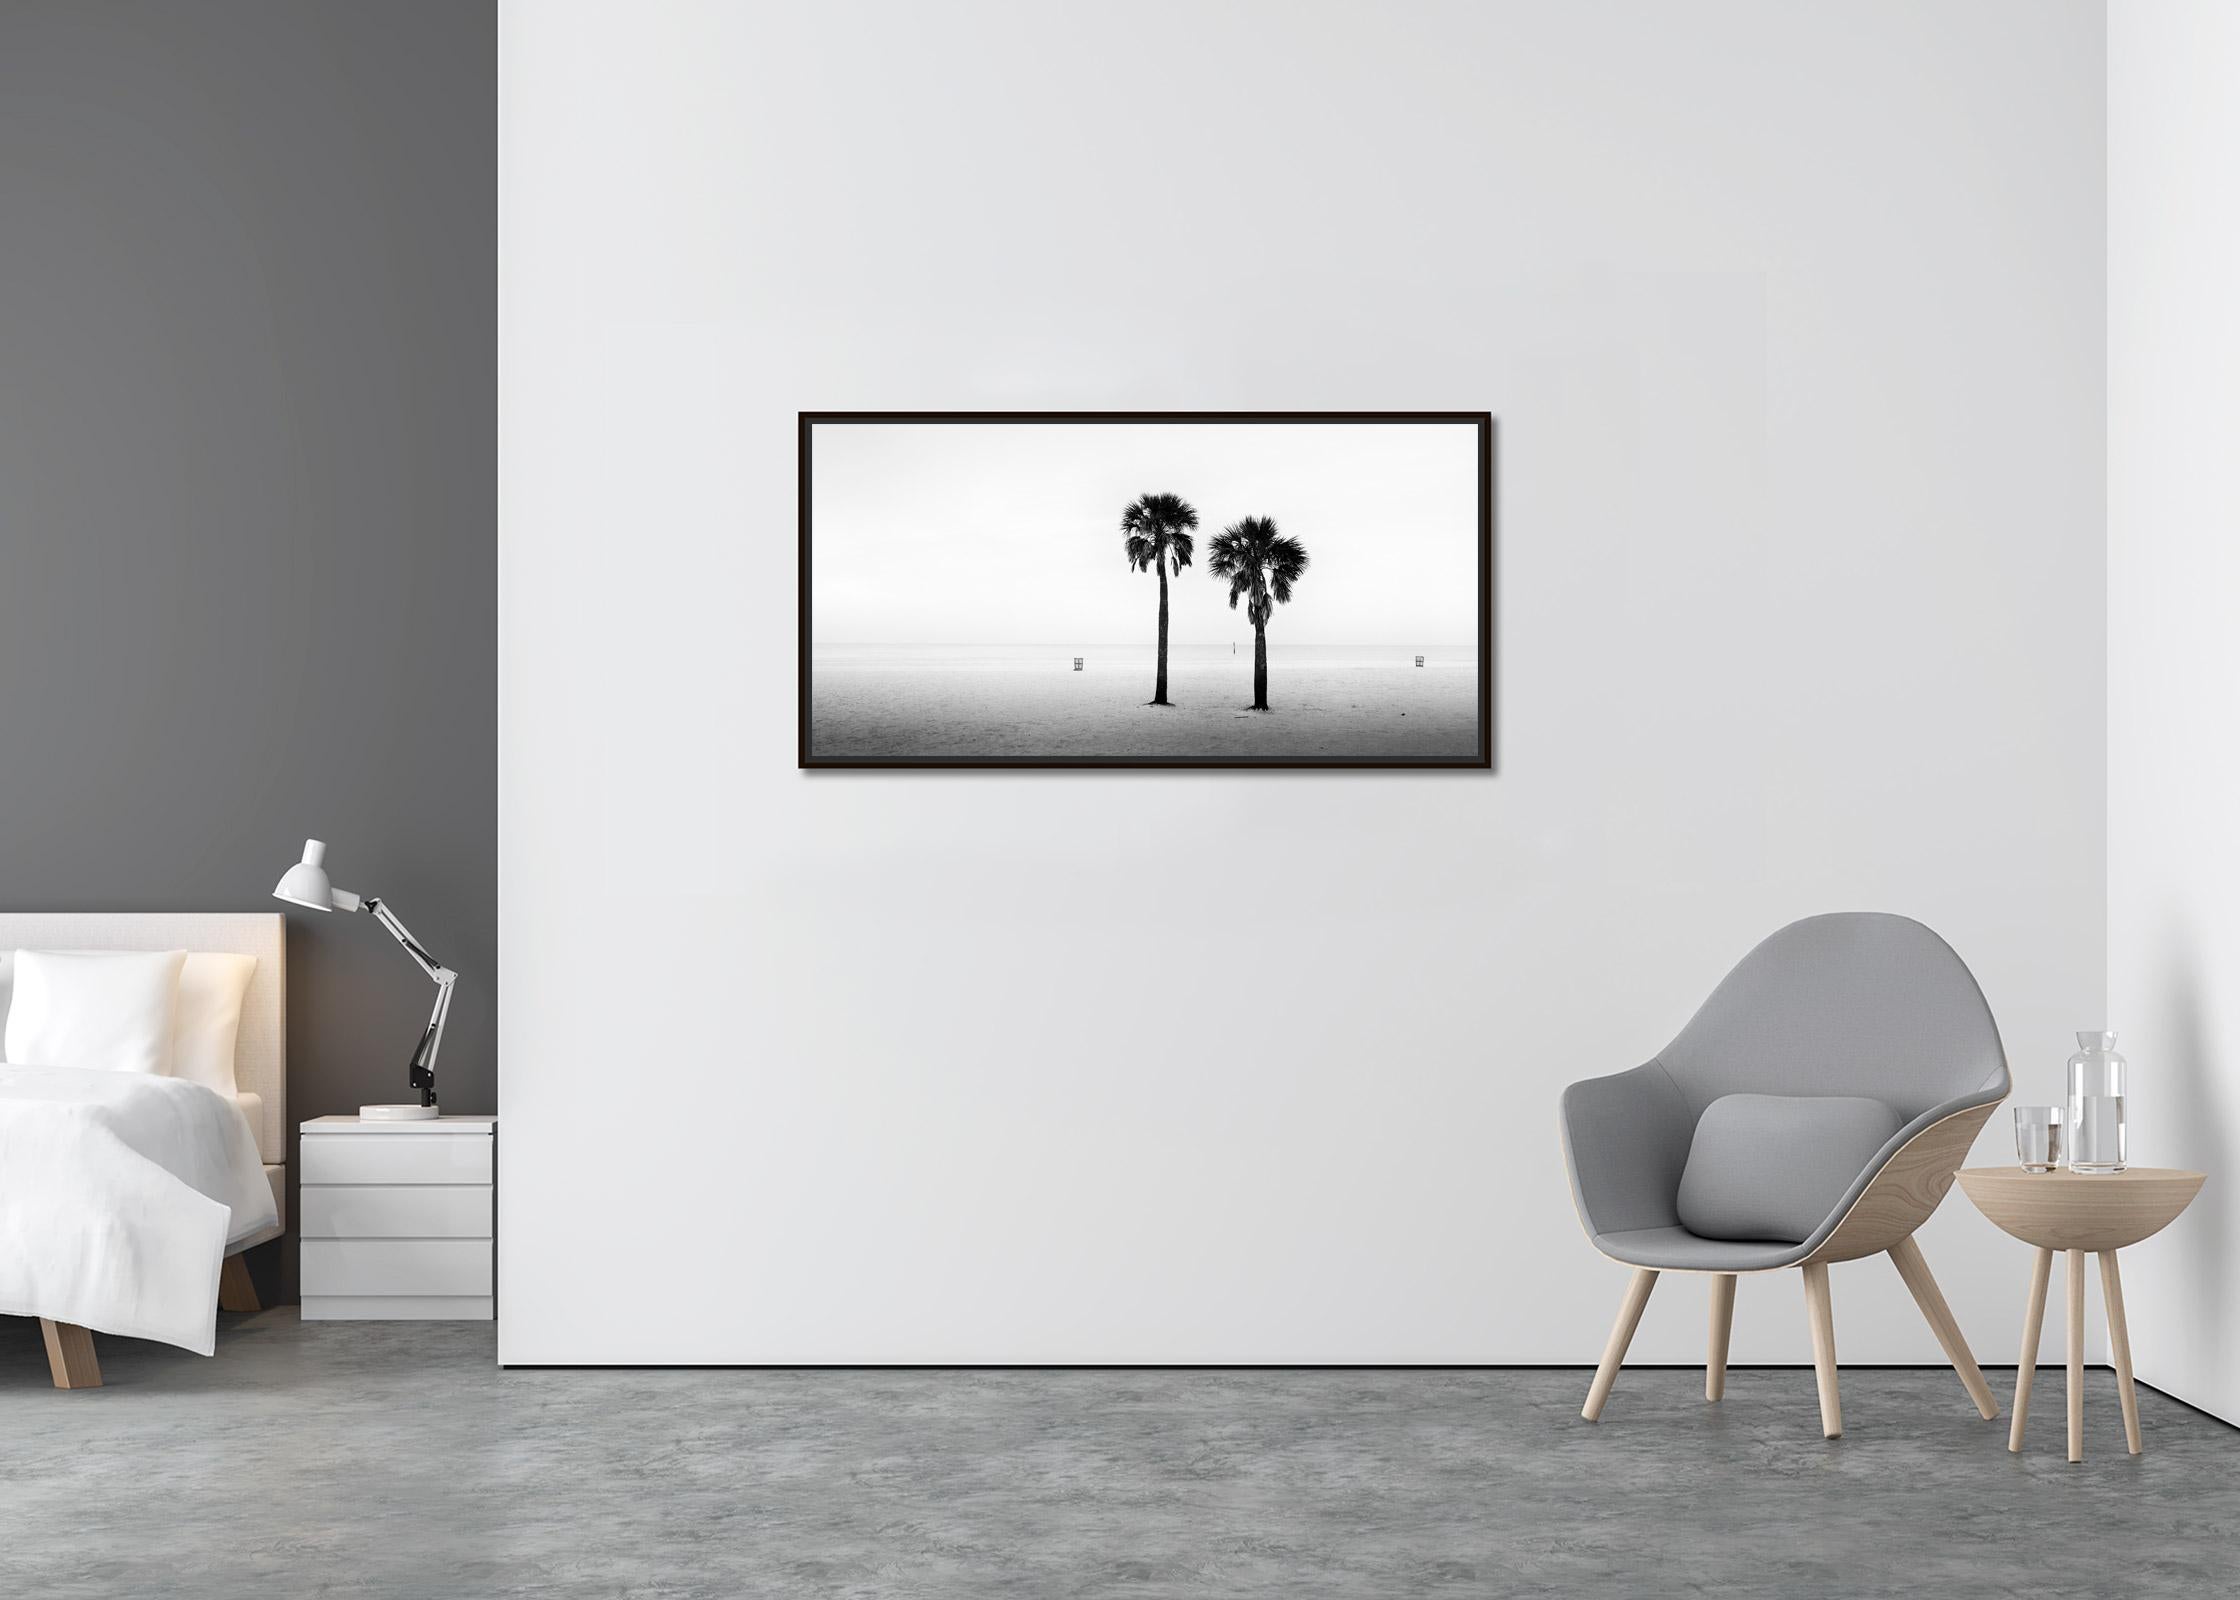 Two Palms, deserted beach, Florida, USA, Black and White landscape photography - Contemporary Photograph by Gerald Berghammer